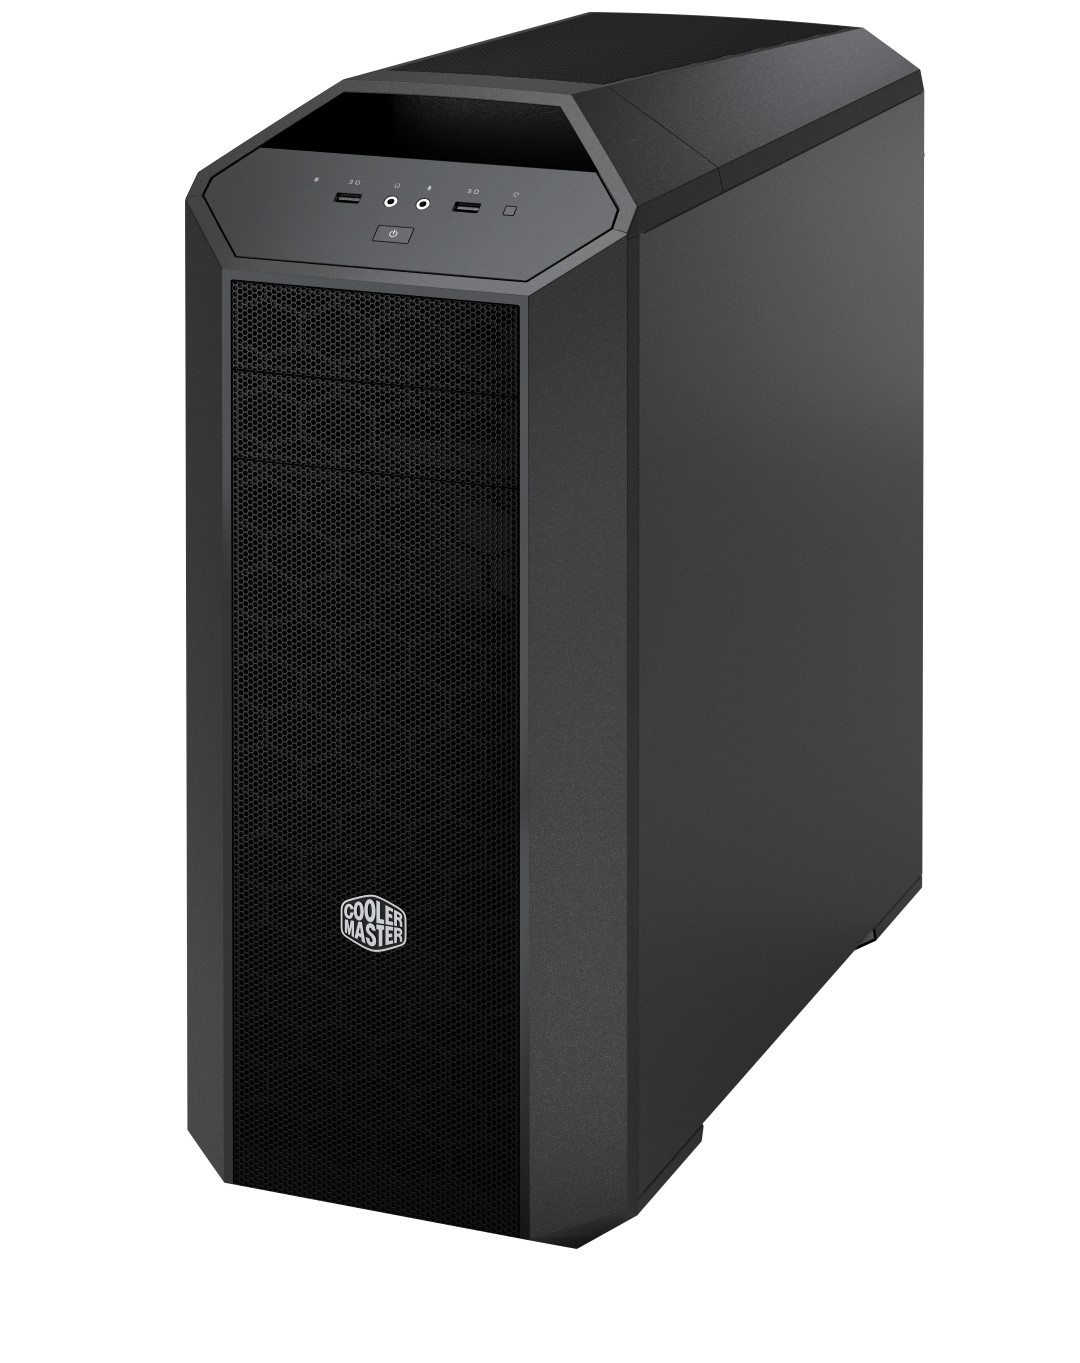 Cooler Master MasterCase 5 available on this 20th August 34